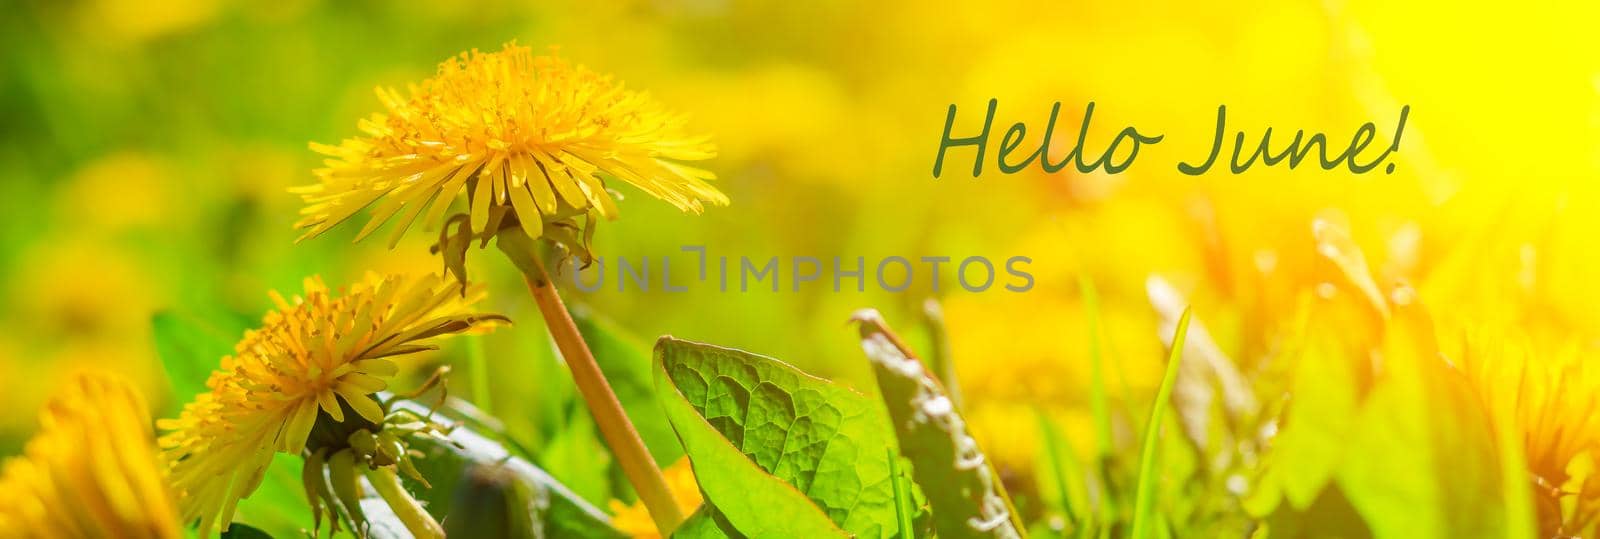 Hello june flowers. Banner hello june. New season. Summer. Dandelions. Yellow summer flowers. Dandelions flowers with place for text. Bright yellow flowers and green grass. by alenka2194